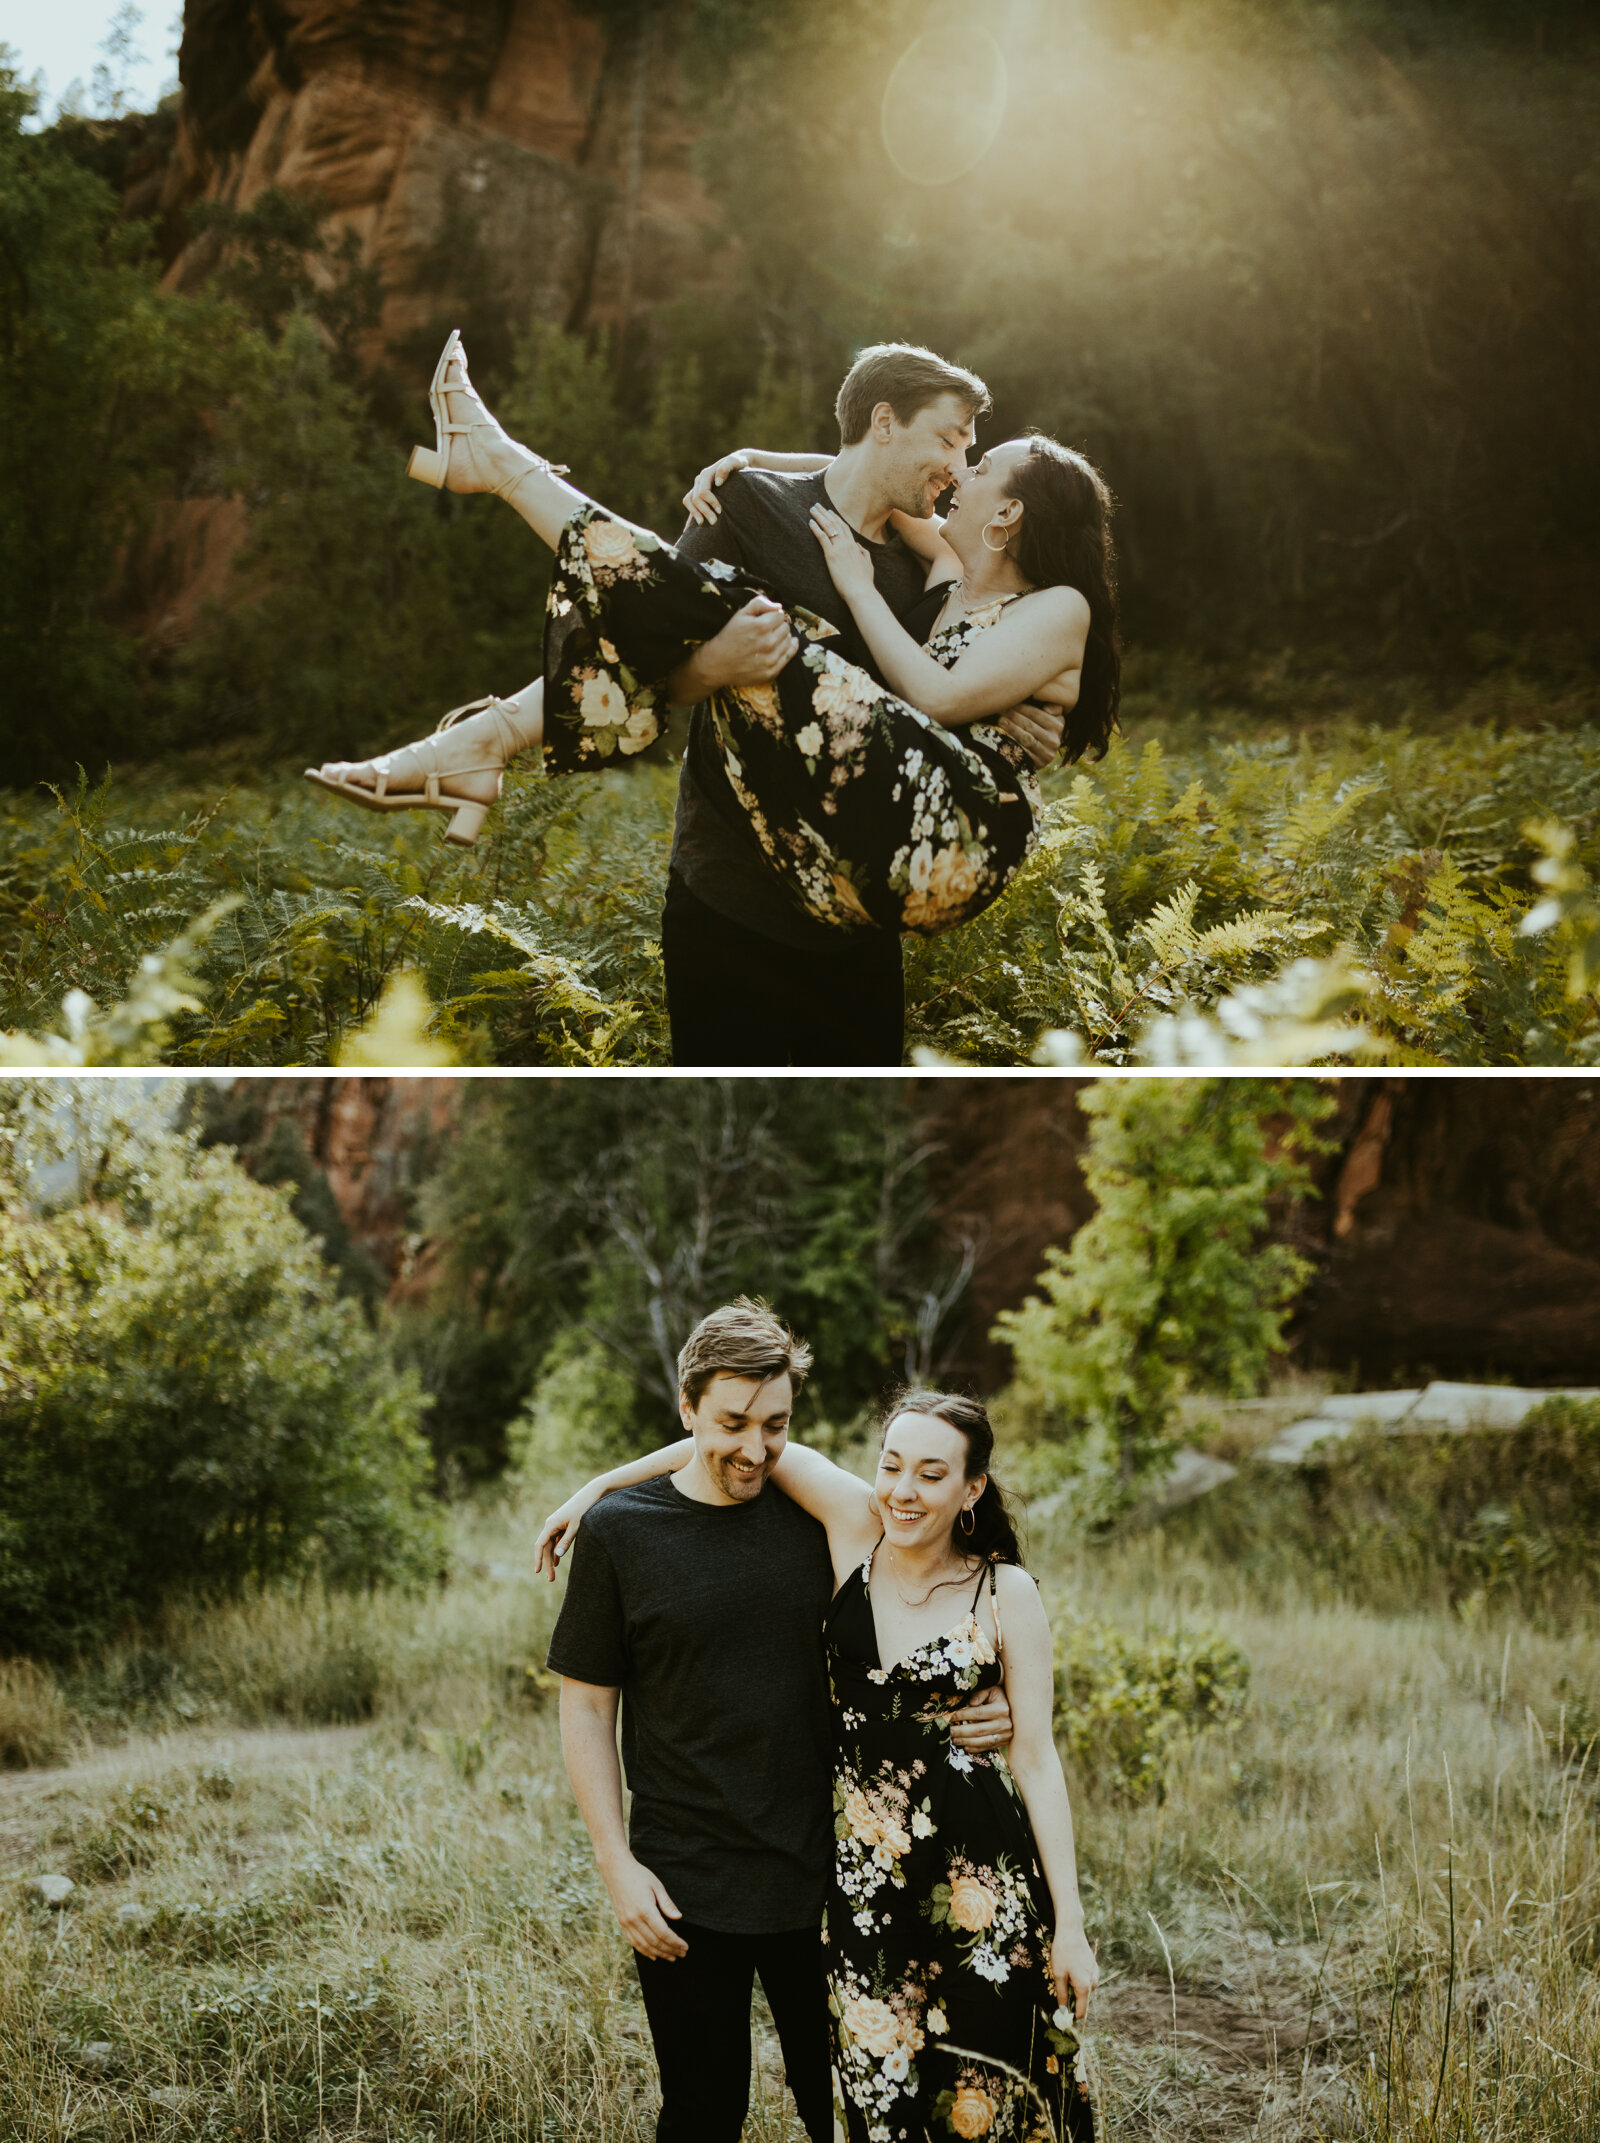 west fork trail sedona arizona engagement photos couple outfit ideas for an engagement session.jpg